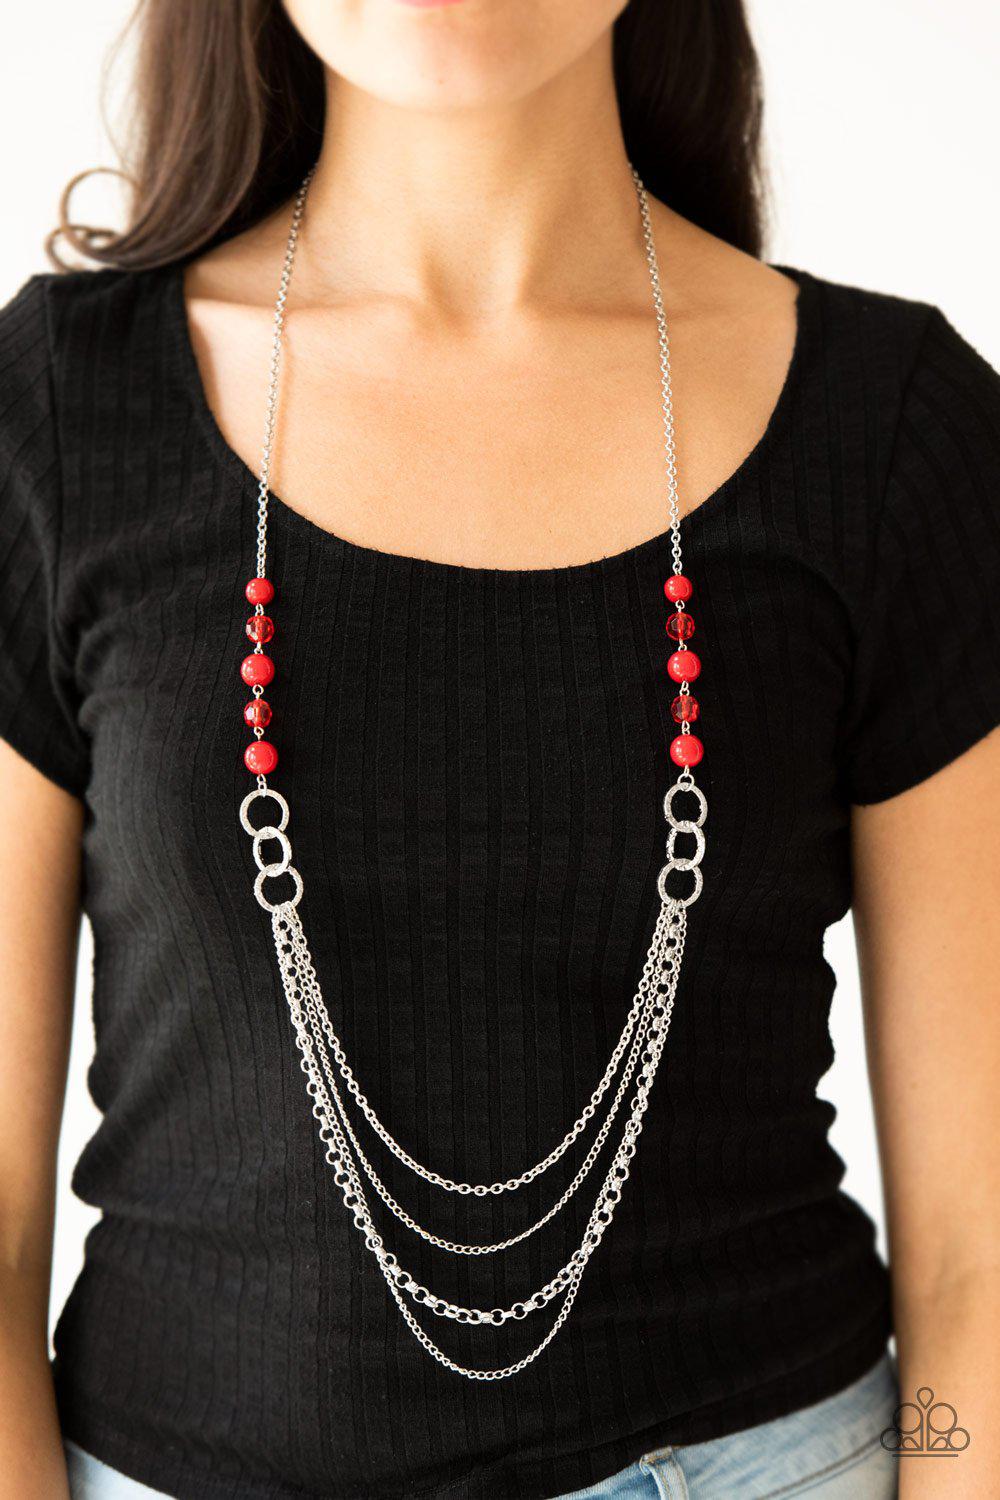 Vividly Vivid Red Necklace - Paparazzi Accessories - model -CarasShop.com - $5 Jewelry by Cara Jewels